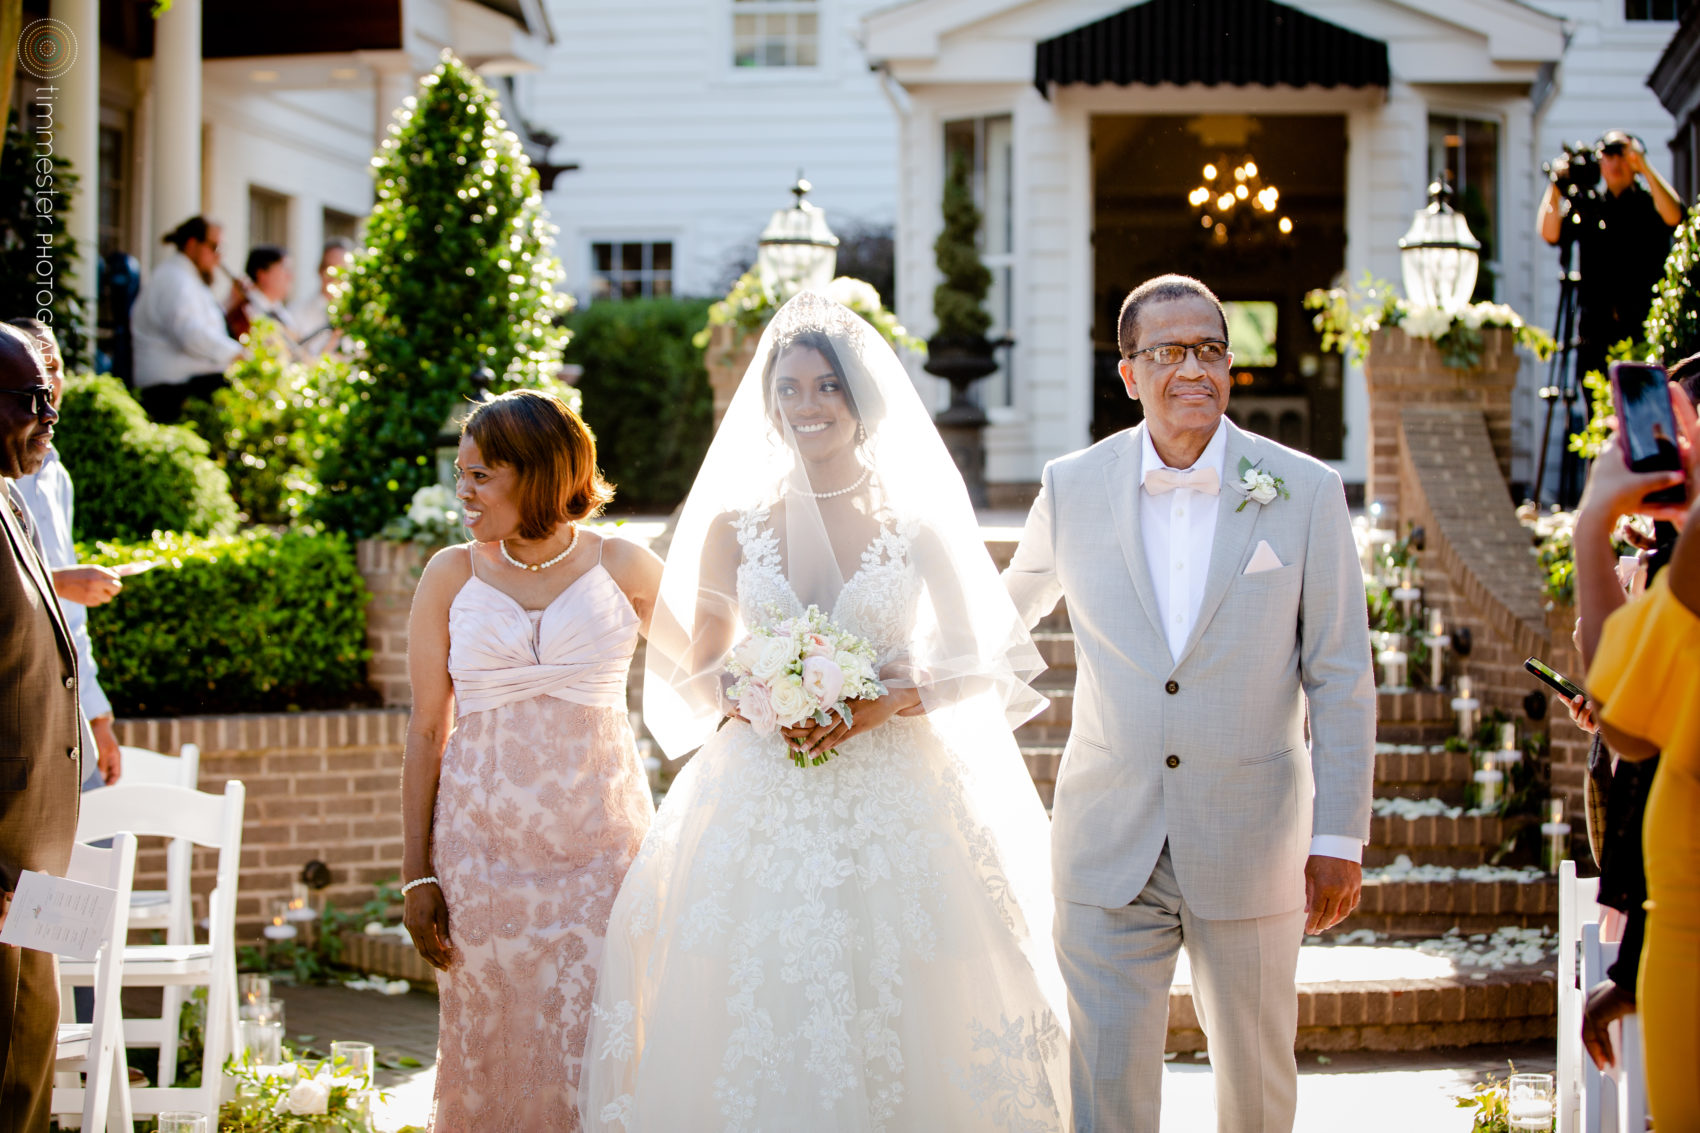 An outdoor wedding ceremony and bride's processional at Highgrove Estate.